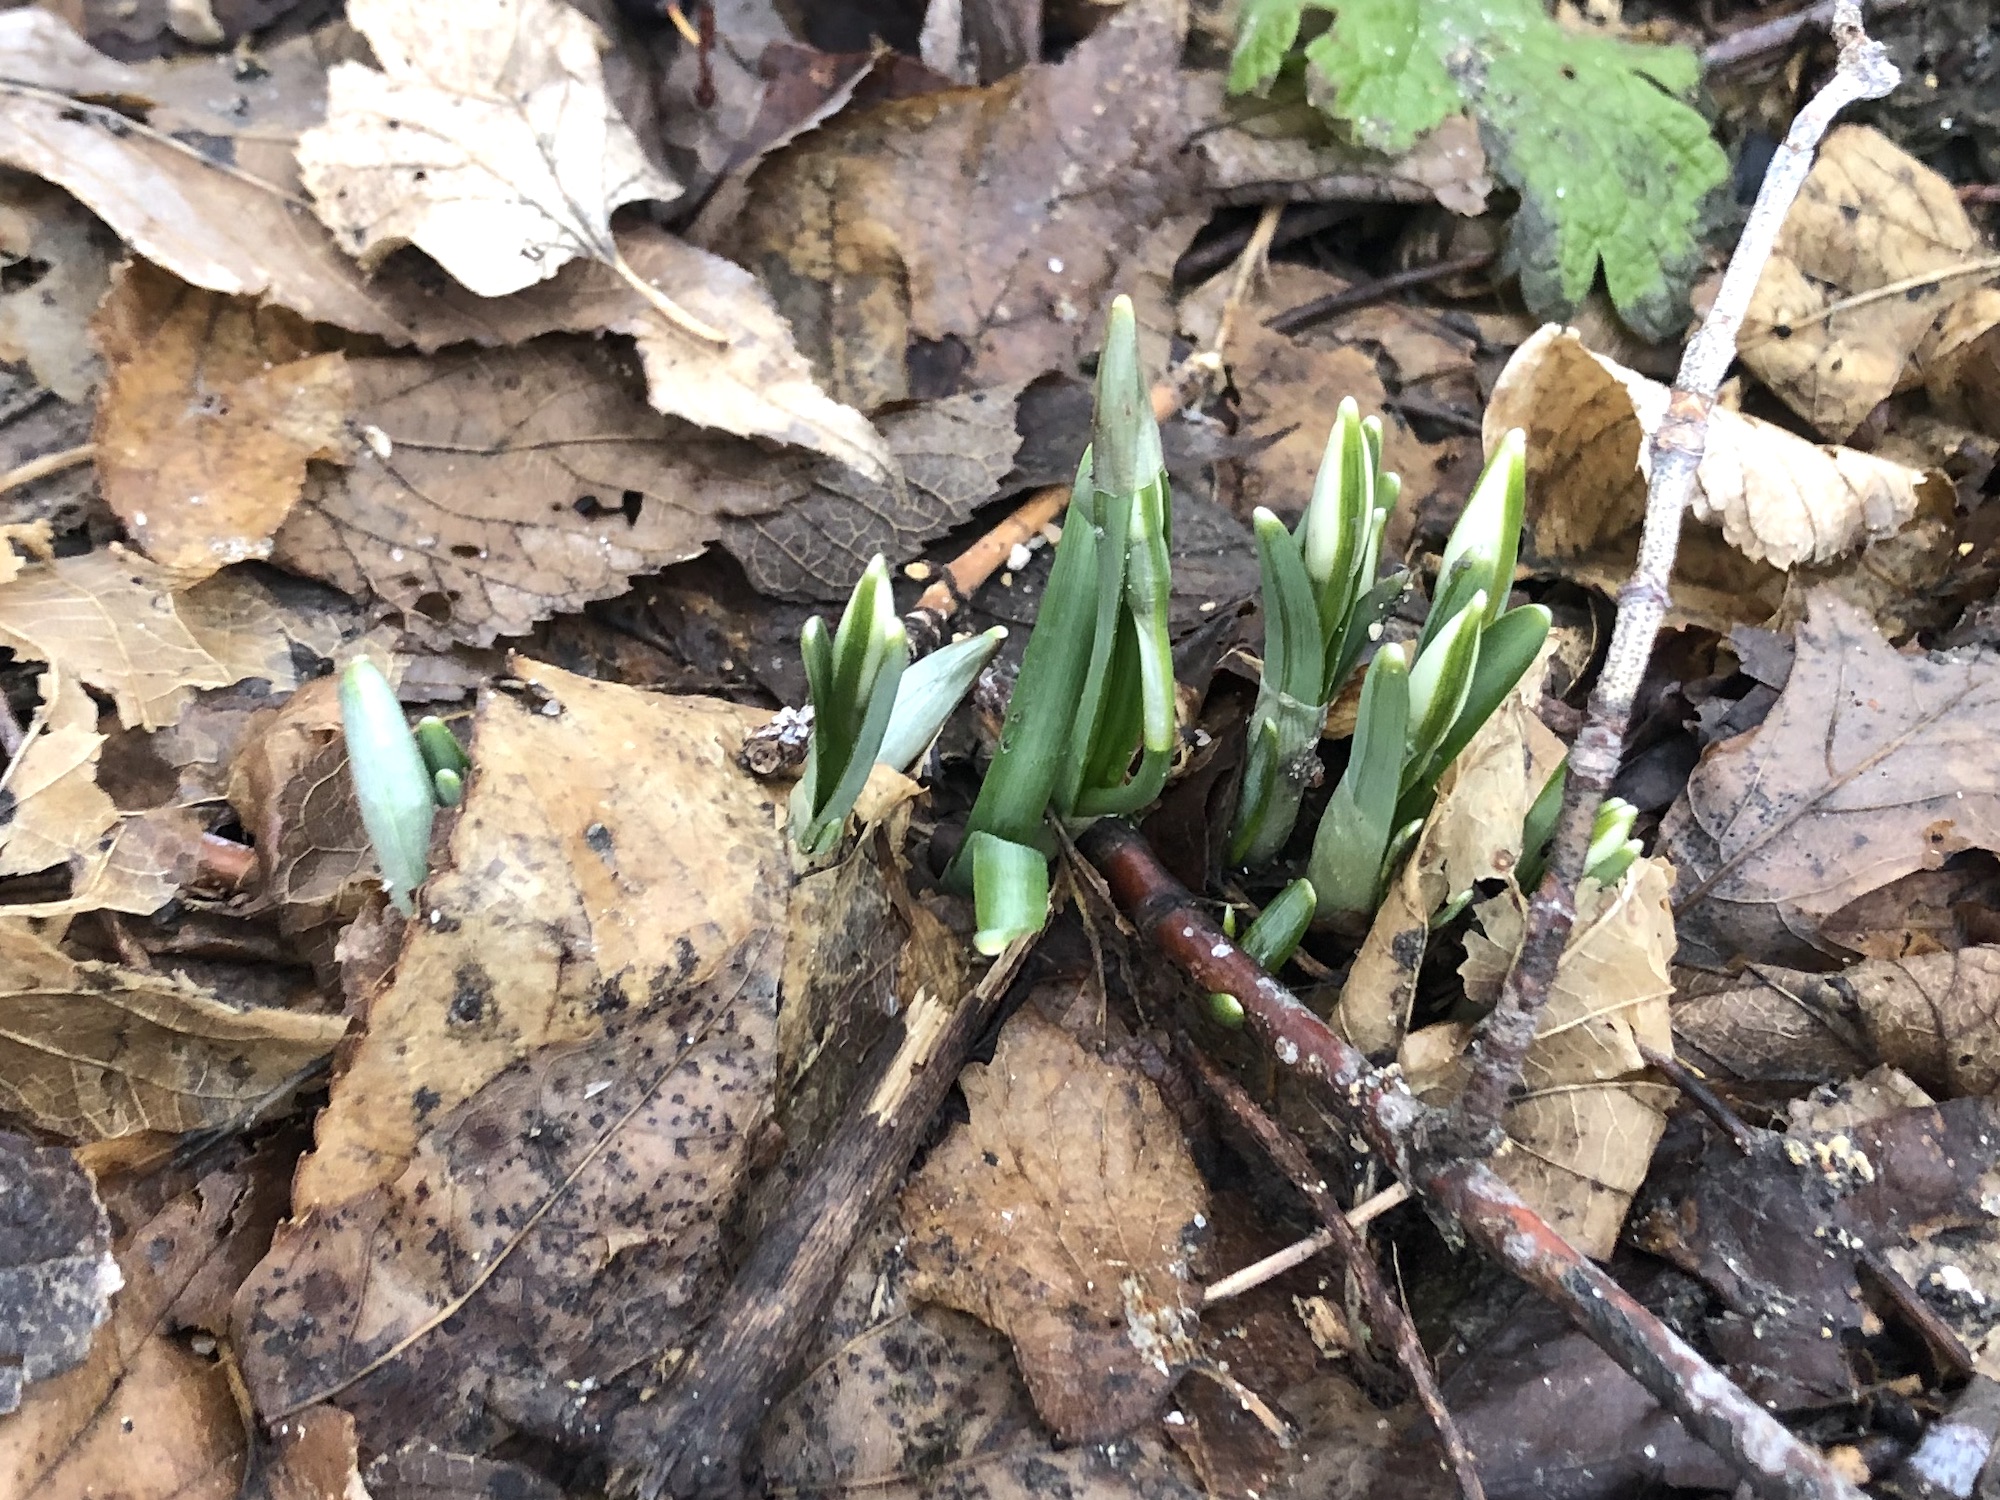 Snowdrops emerging in Madison Wisconsin along Arbor Drive on February 15, 2023.